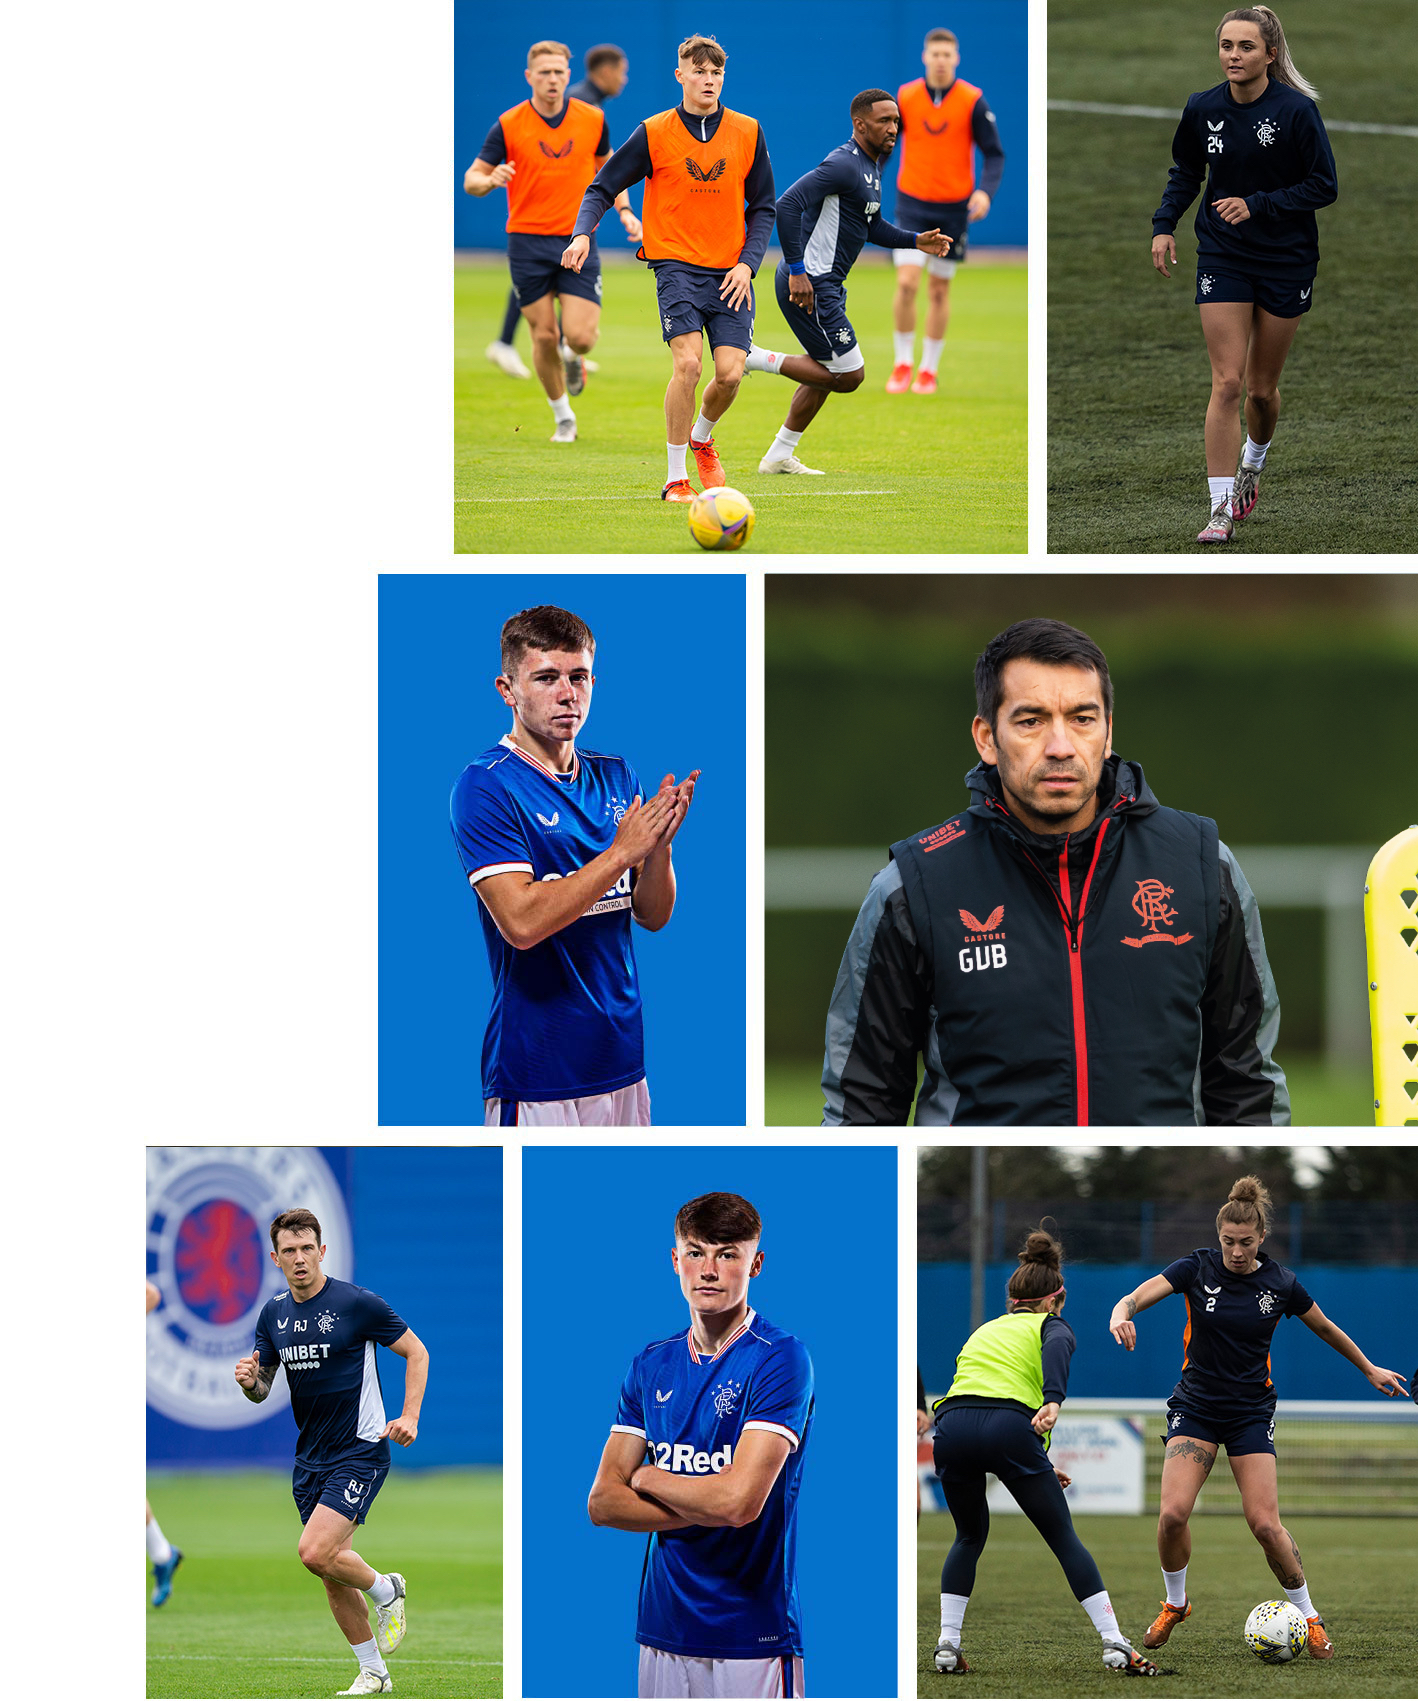 Collage of Rangers players and coaches